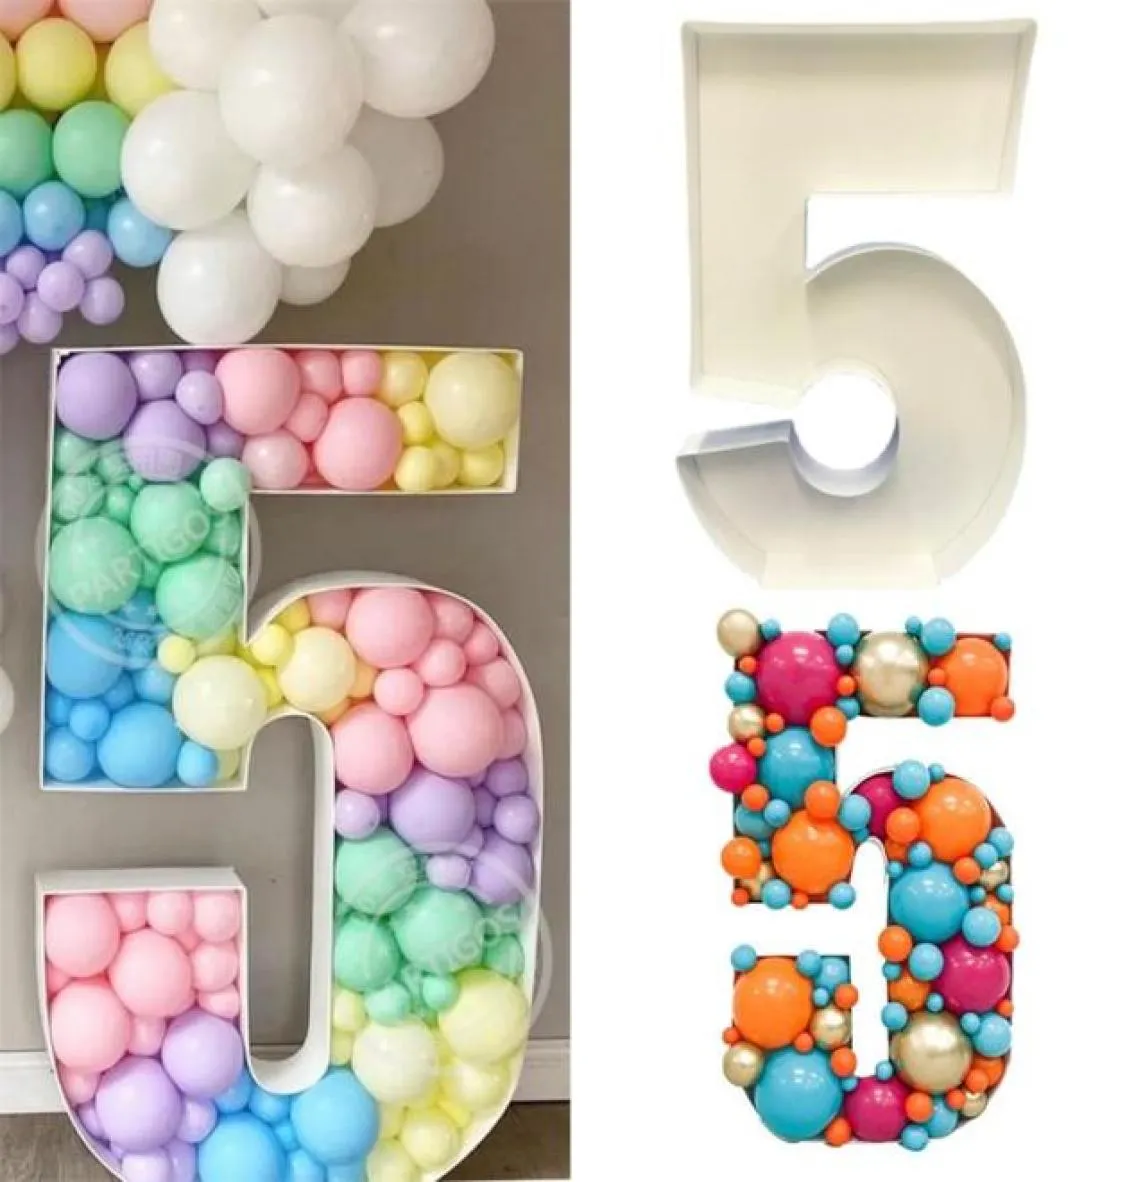 73cm Blank Giant Number 1 2 3 4 5 Balloon Filling Box Mosaic Frame Balloons Stand Kids Adults Birthday Anniversary Party Decor 2208947948